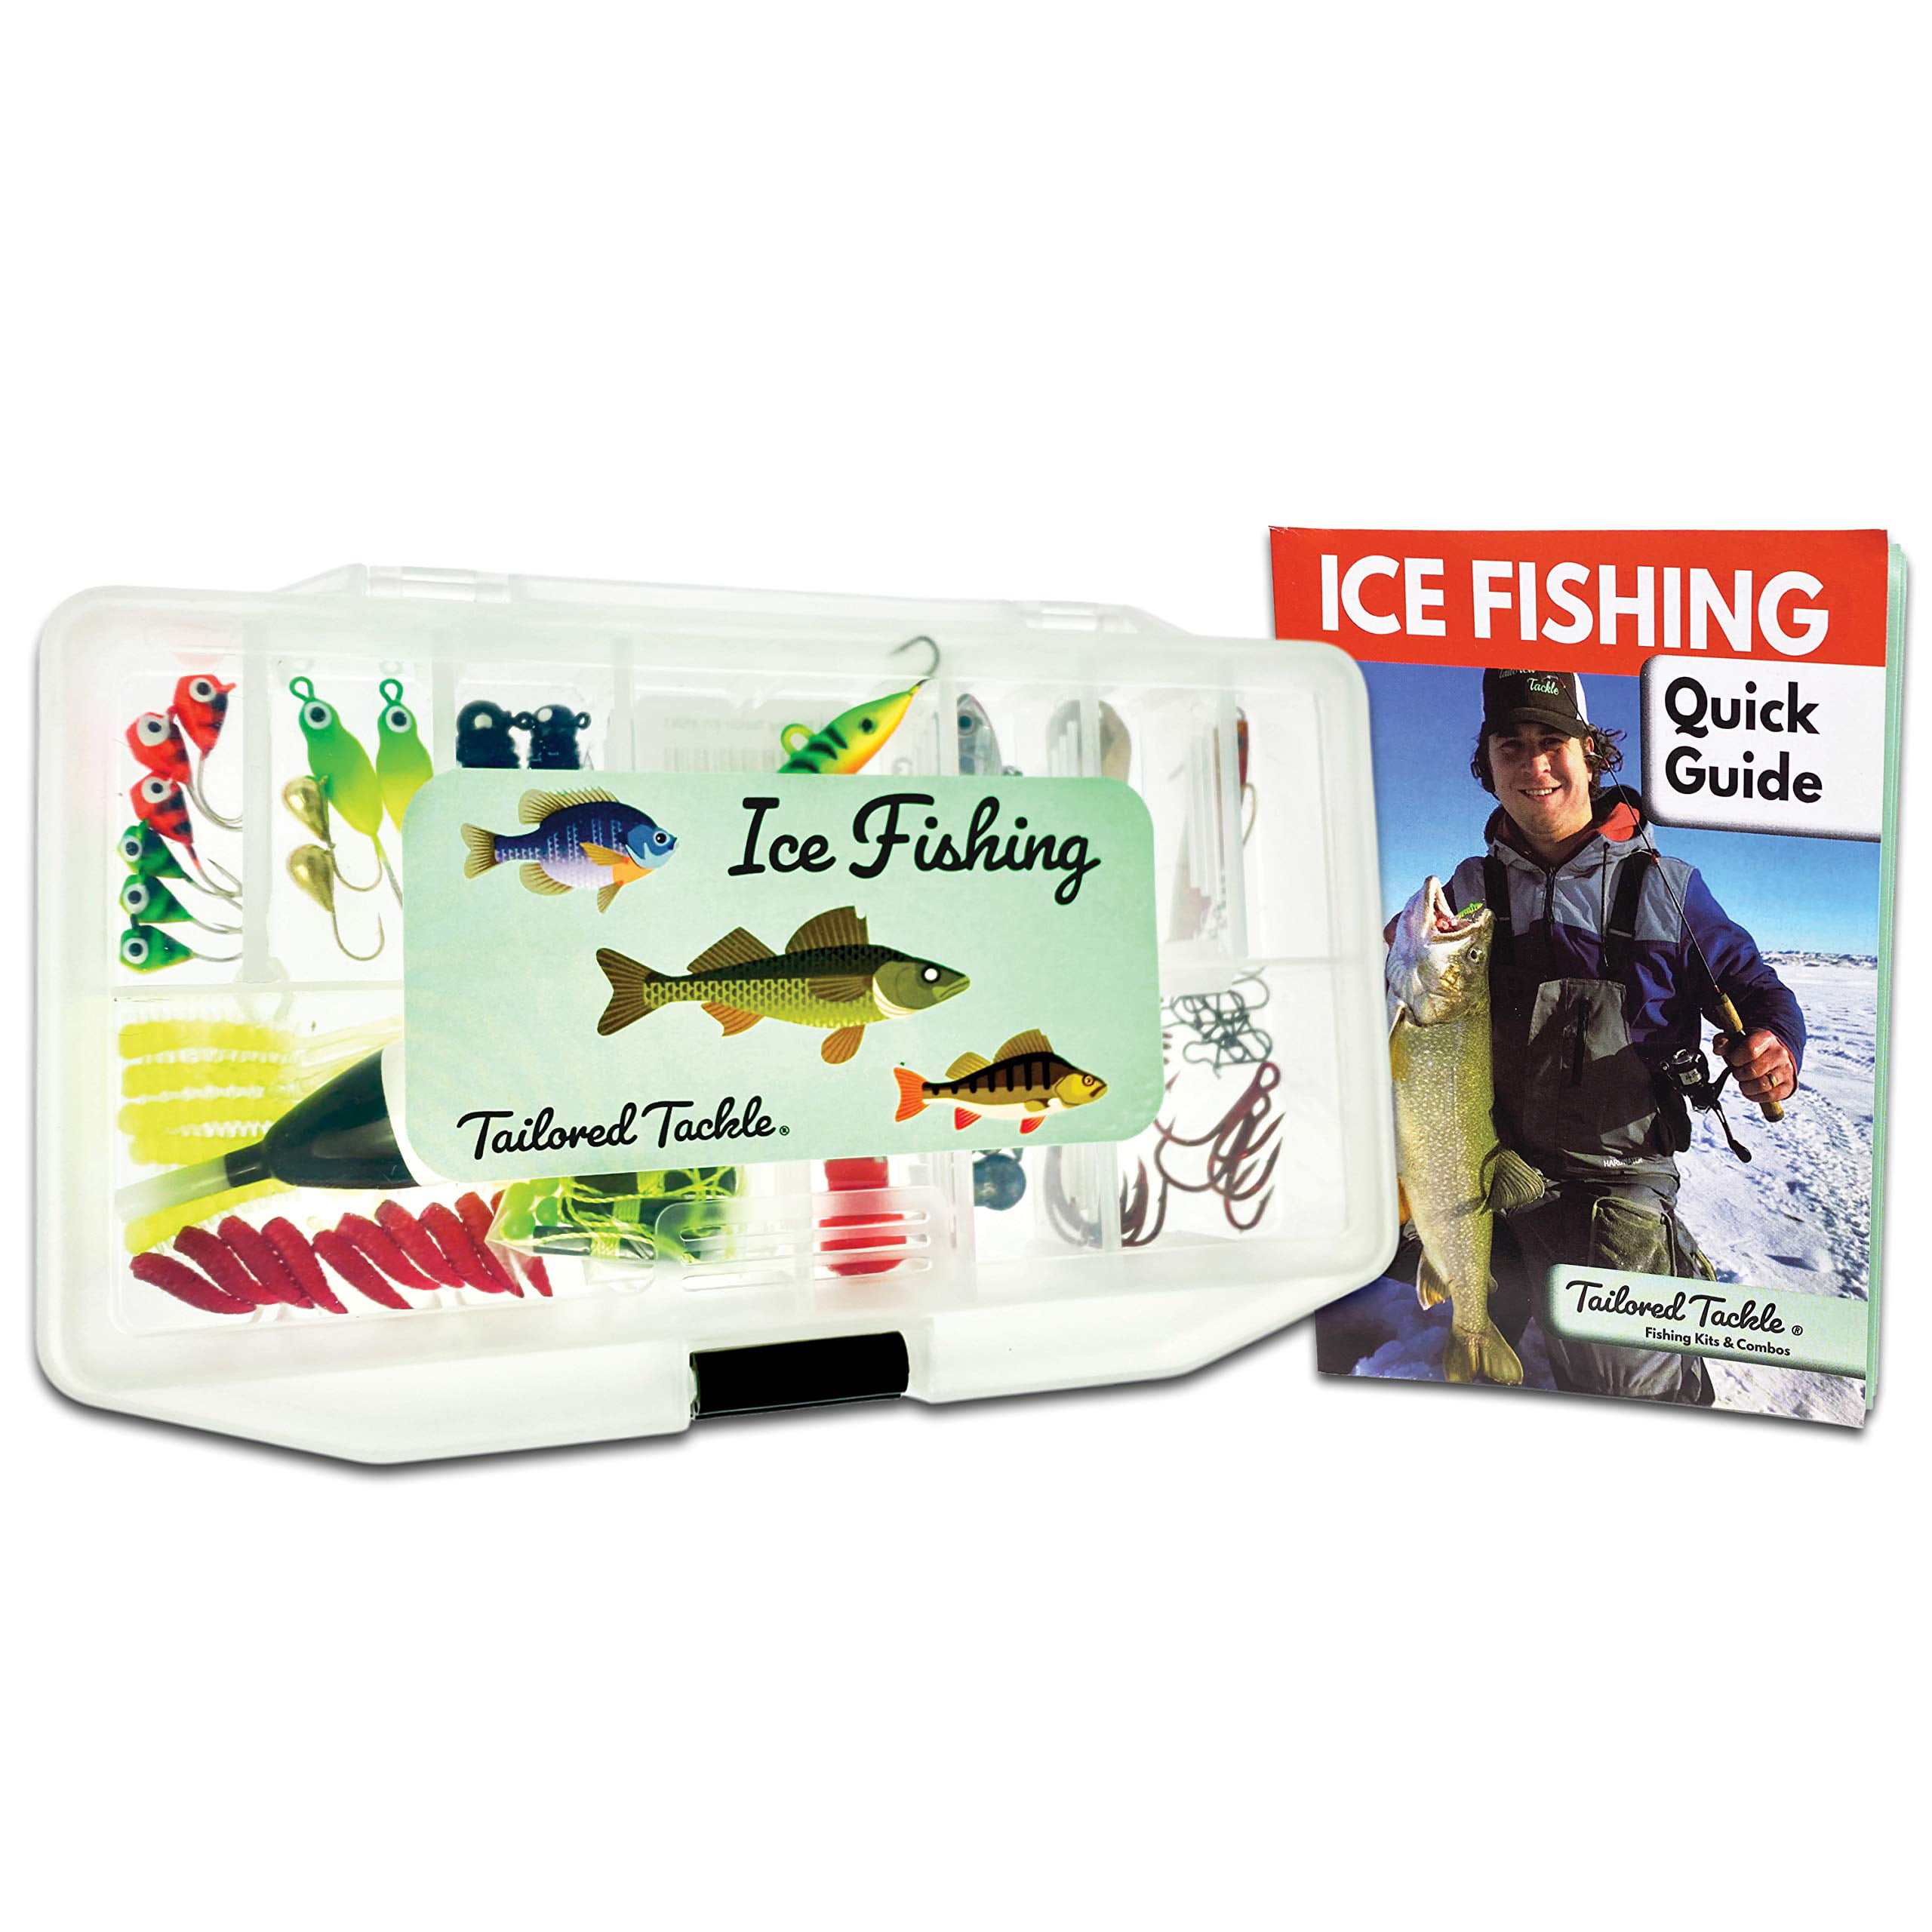 Tailored Tackle Ice Fishing Jigs Lures Kit Walleye Perch Panfish Crappie  Bluegill Ice Fishing Gear Tackle Box 75 pcs. Include 26 Page How to Ice  Fish